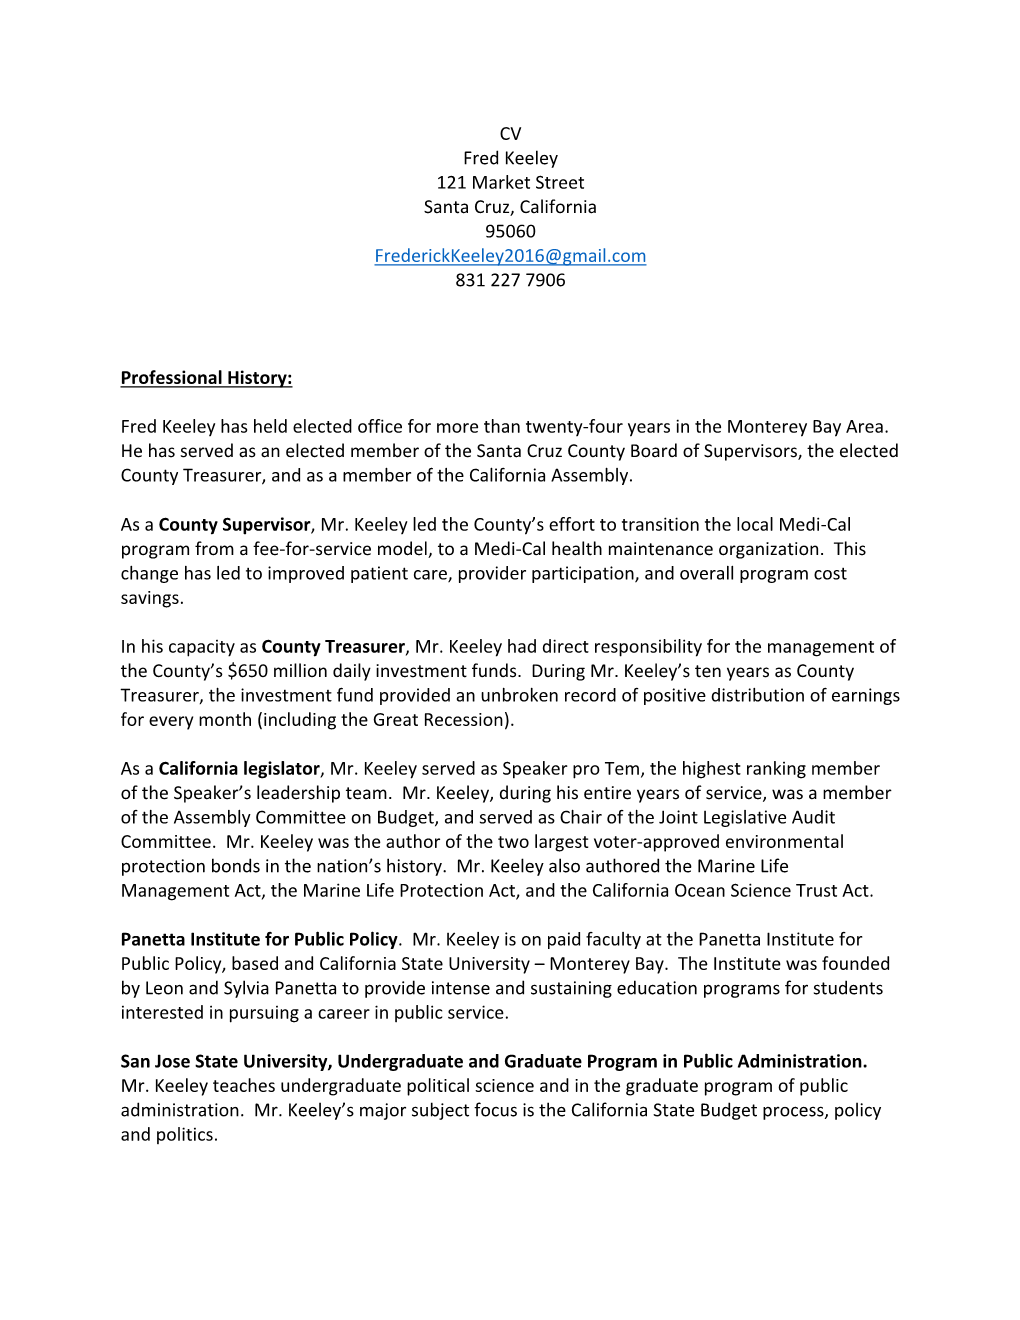 Fred Keeley's CV